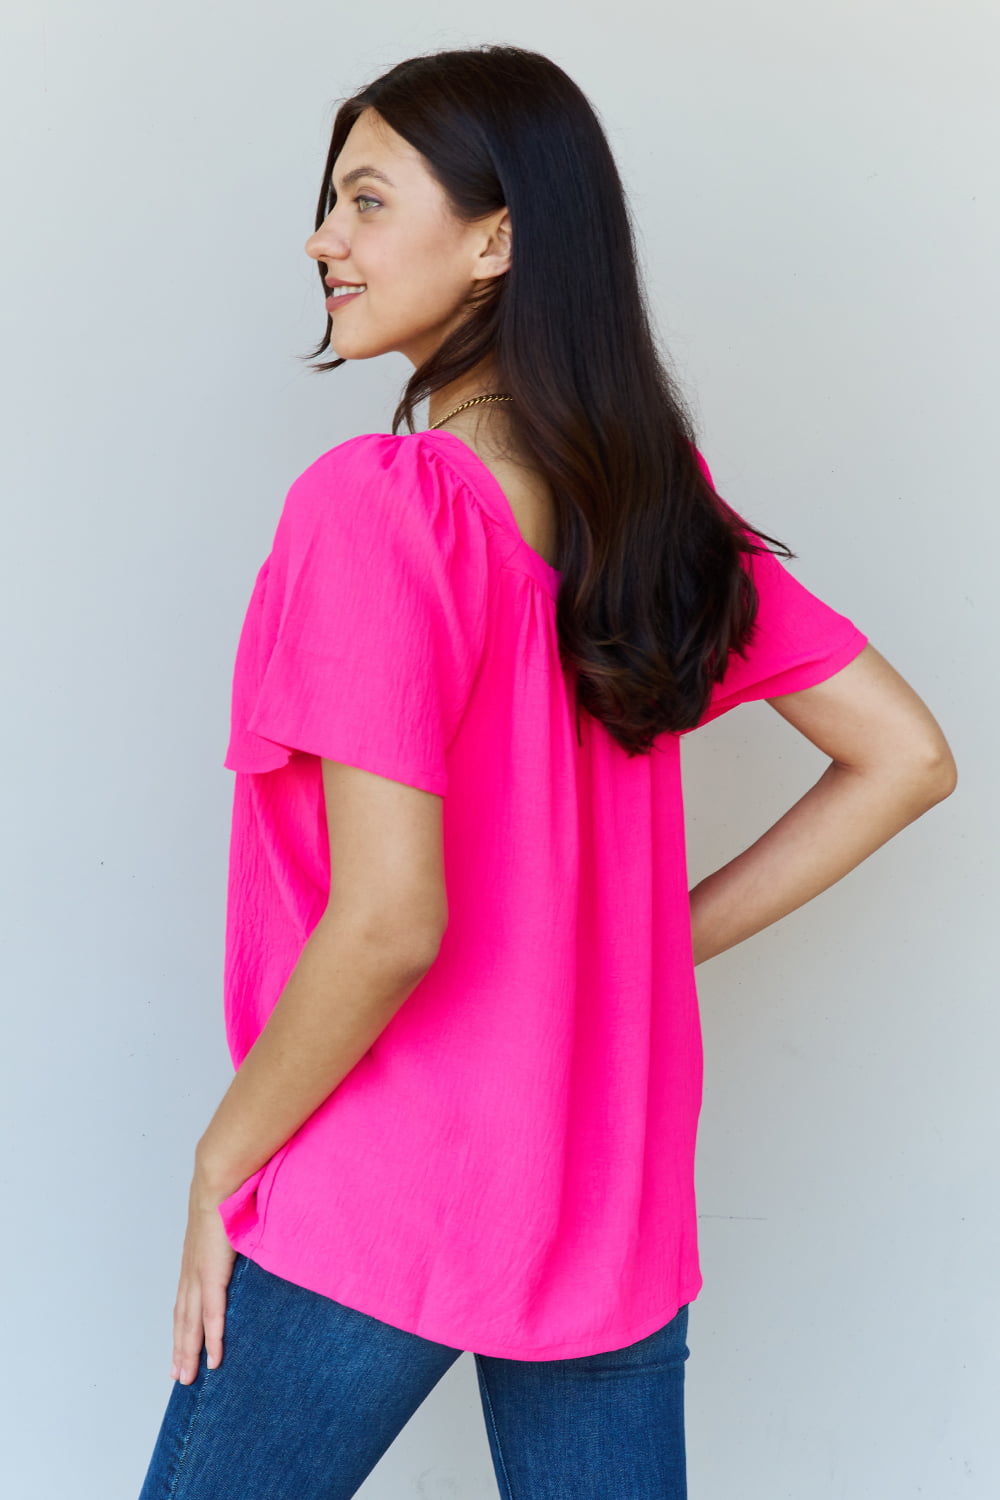 Keep Me Close Square Neck Short Sleeve Blouse in Fuchsia - Women’s Clothing & Accessories - Dresses - 2 - 2024